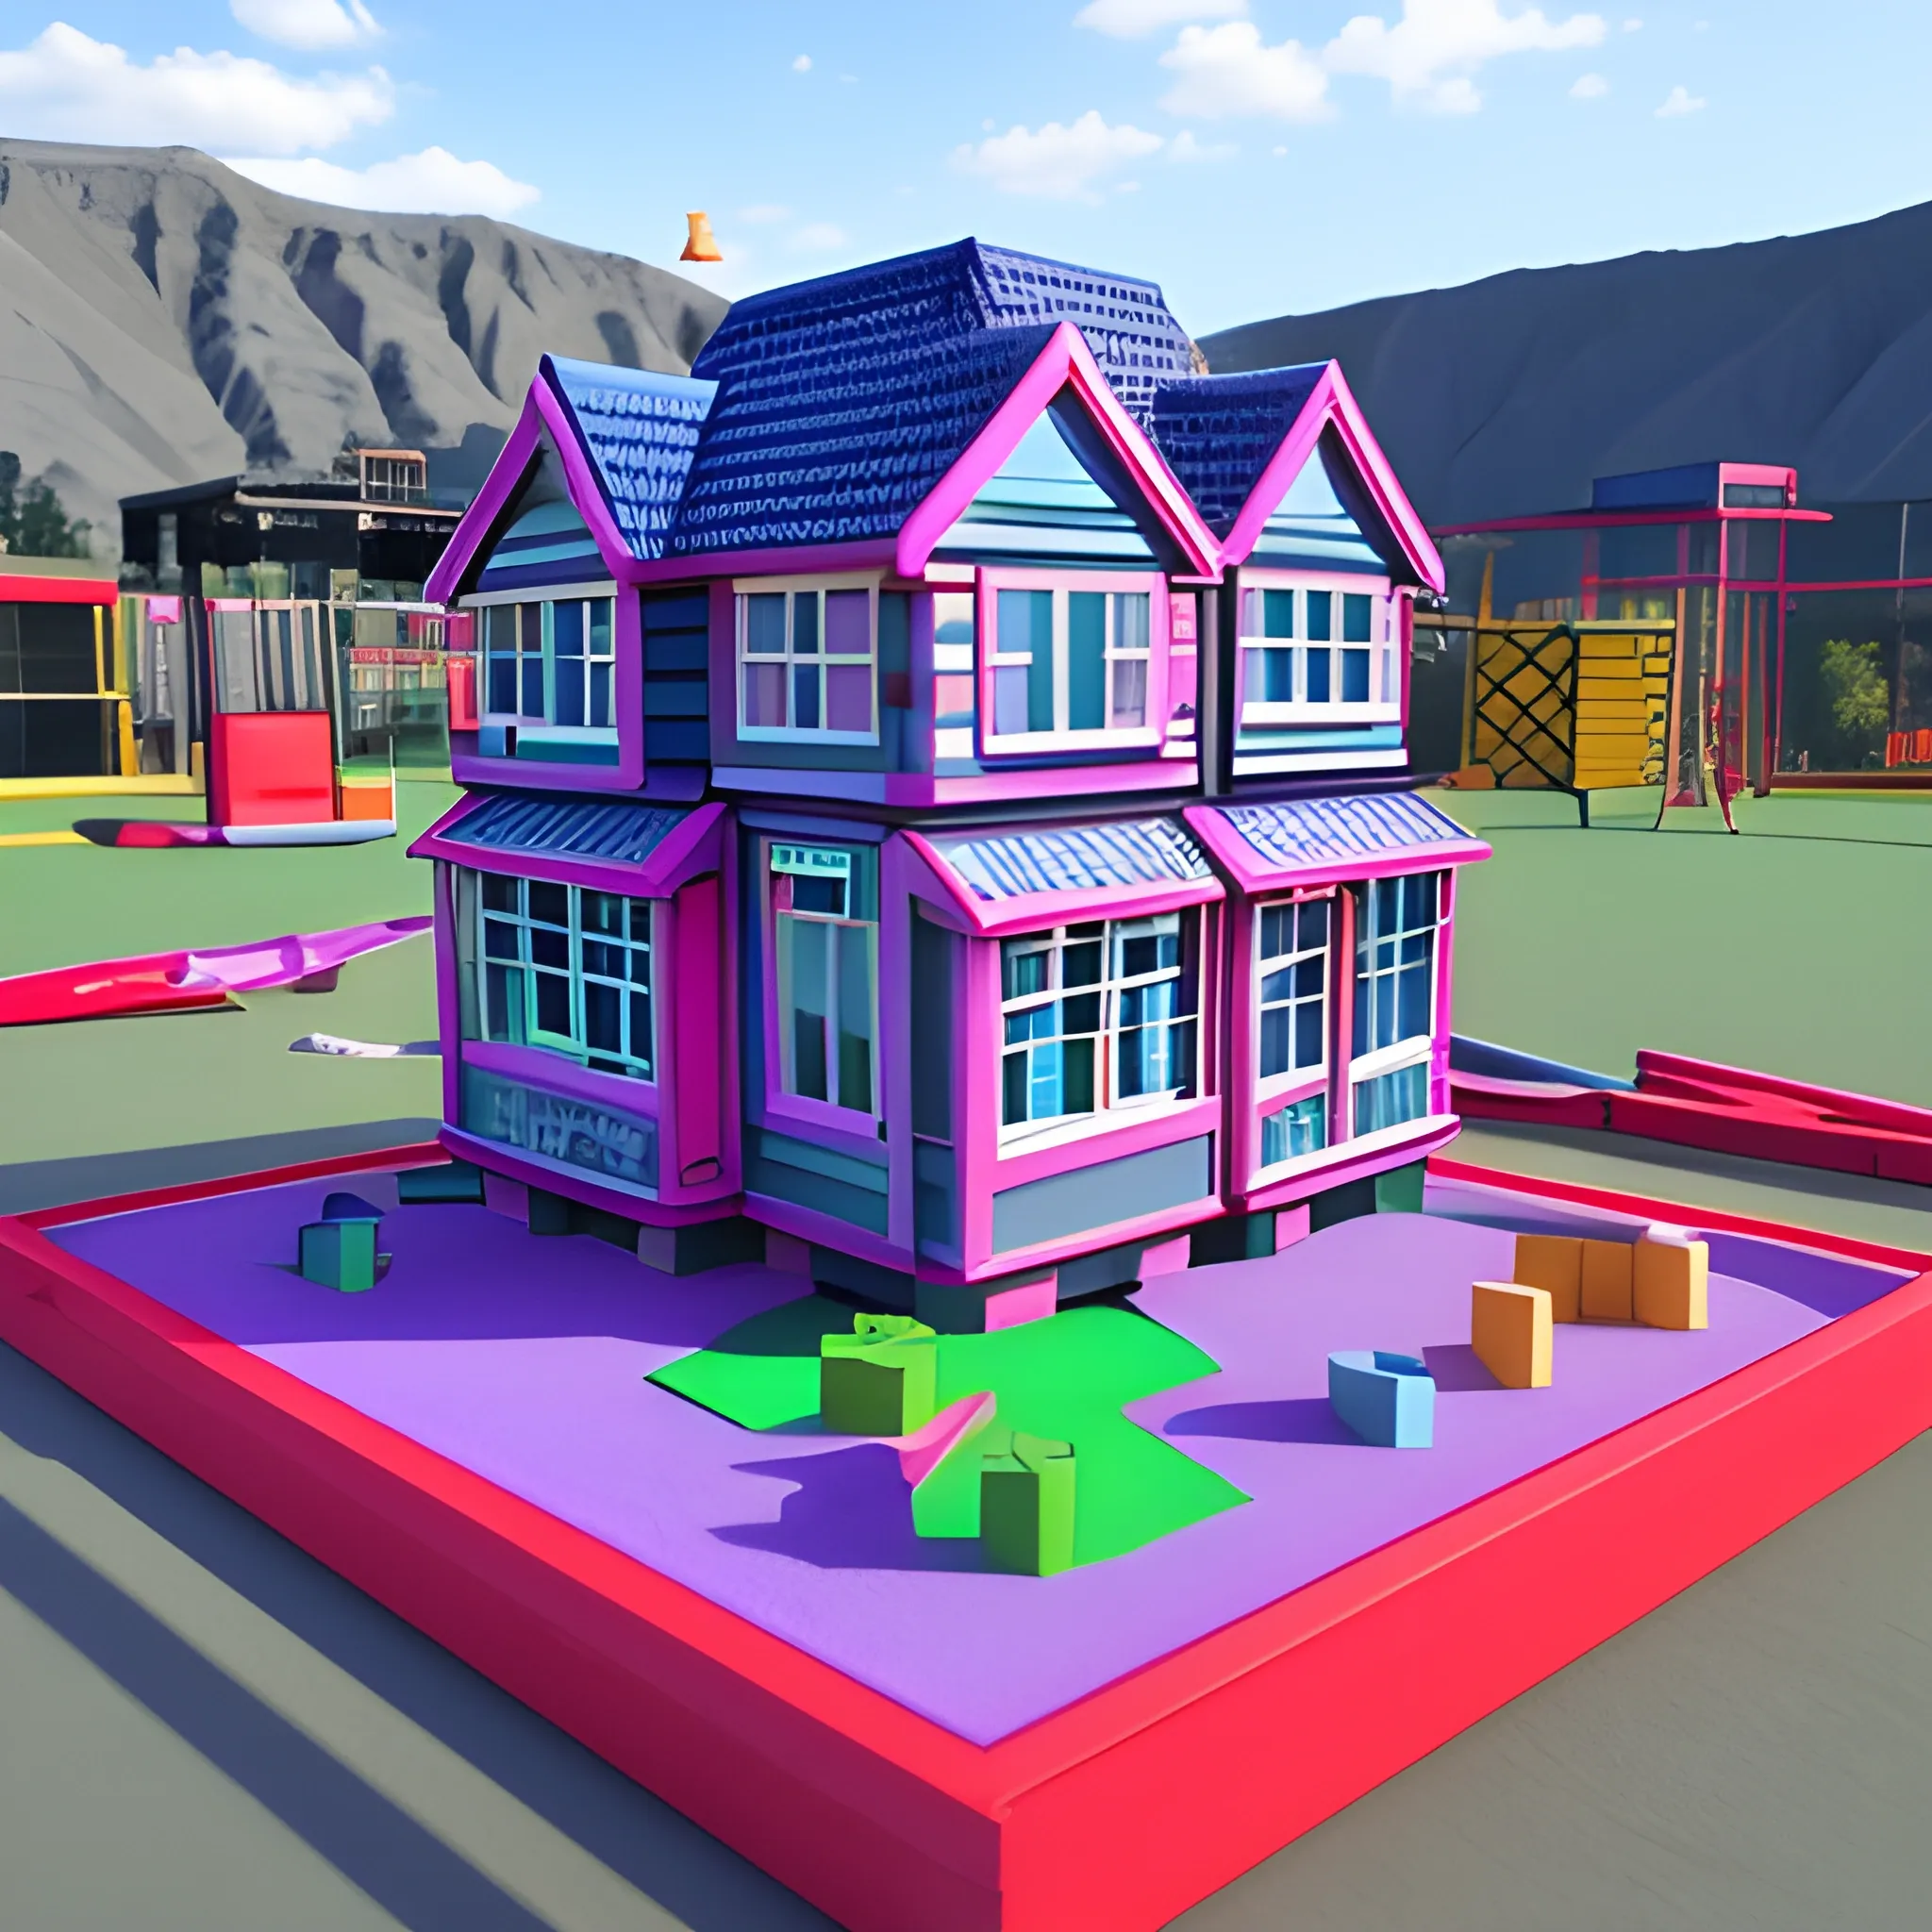 education, game, builings, happy, play, houses, balls, cranes, improve, colours, people, meals, feeling good, work, school, adults, learn, 3D, houses, child stand between cranes, Trippy